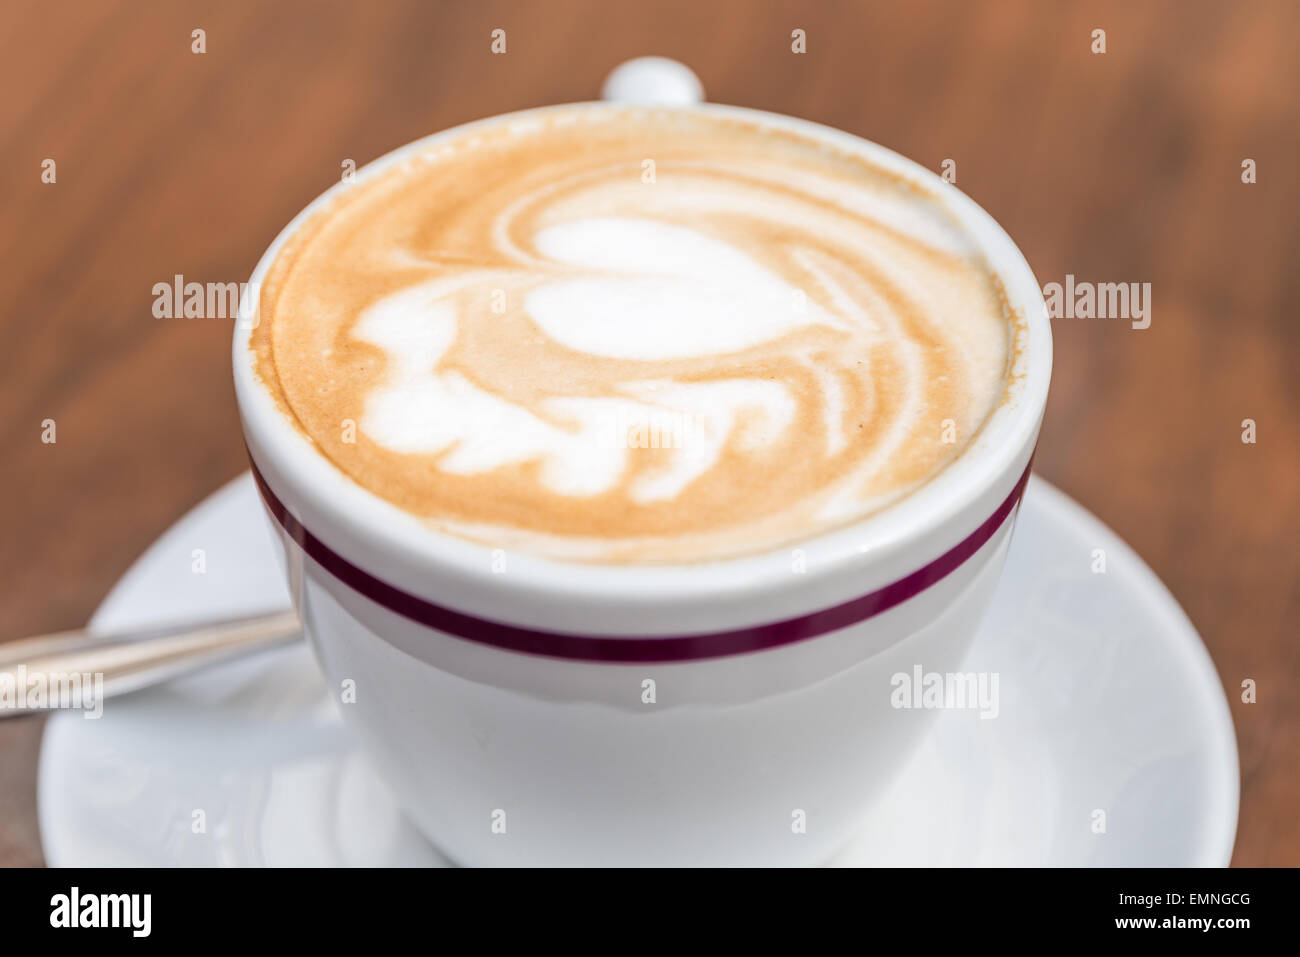 White Cup Of Coffee With Heart Pattern On Wooden Table Stock Photo